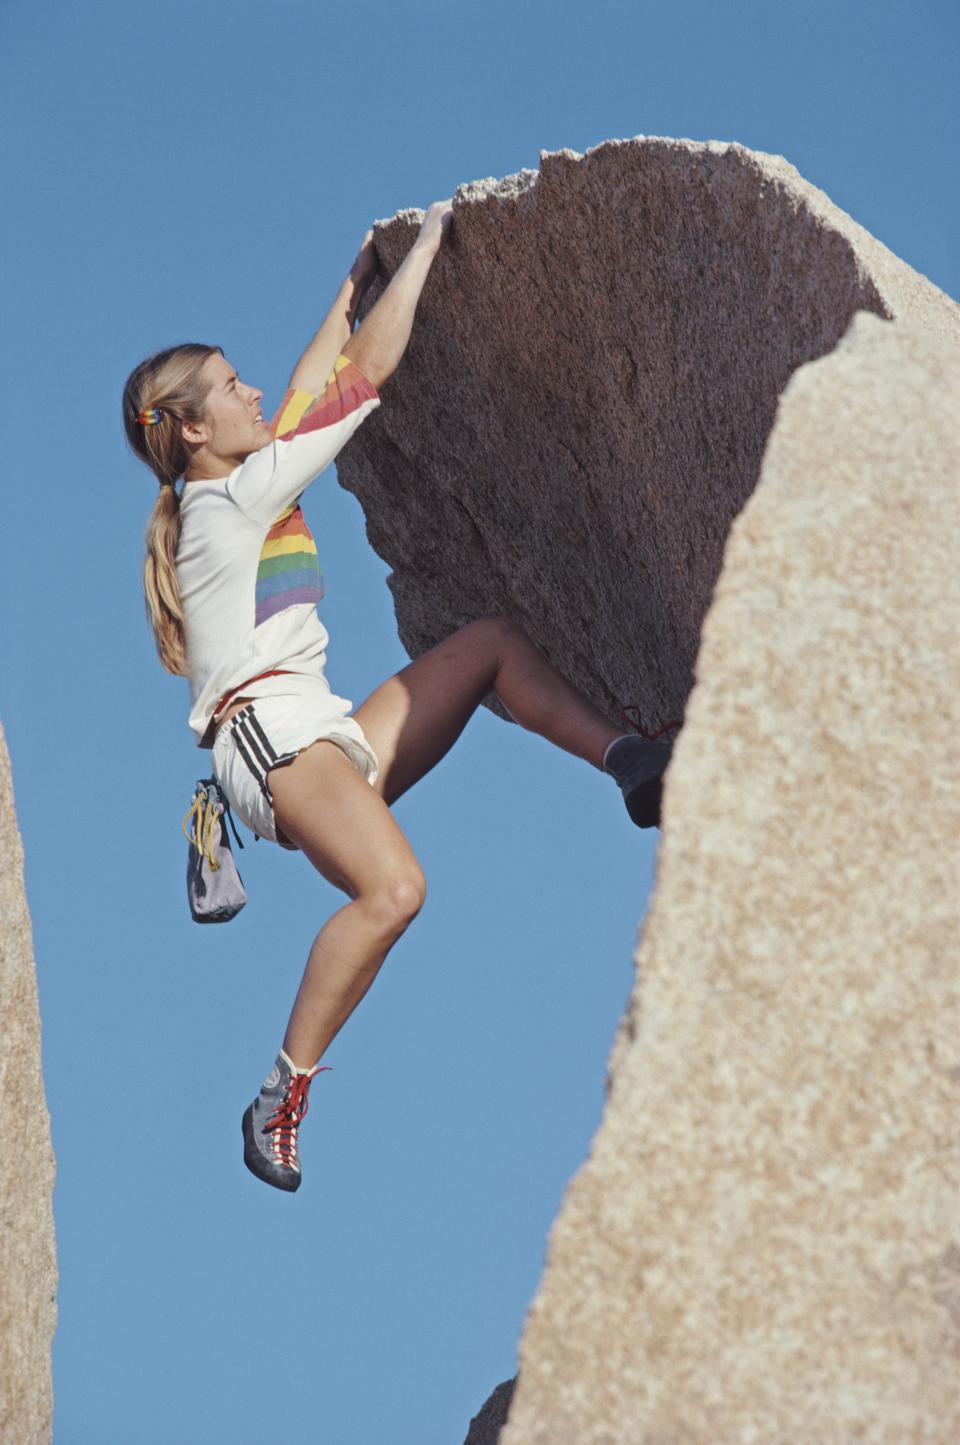 <h1 class="title">Free Climbing</h1><cite class="credit">Tony Duffy / Getty Images</cite>